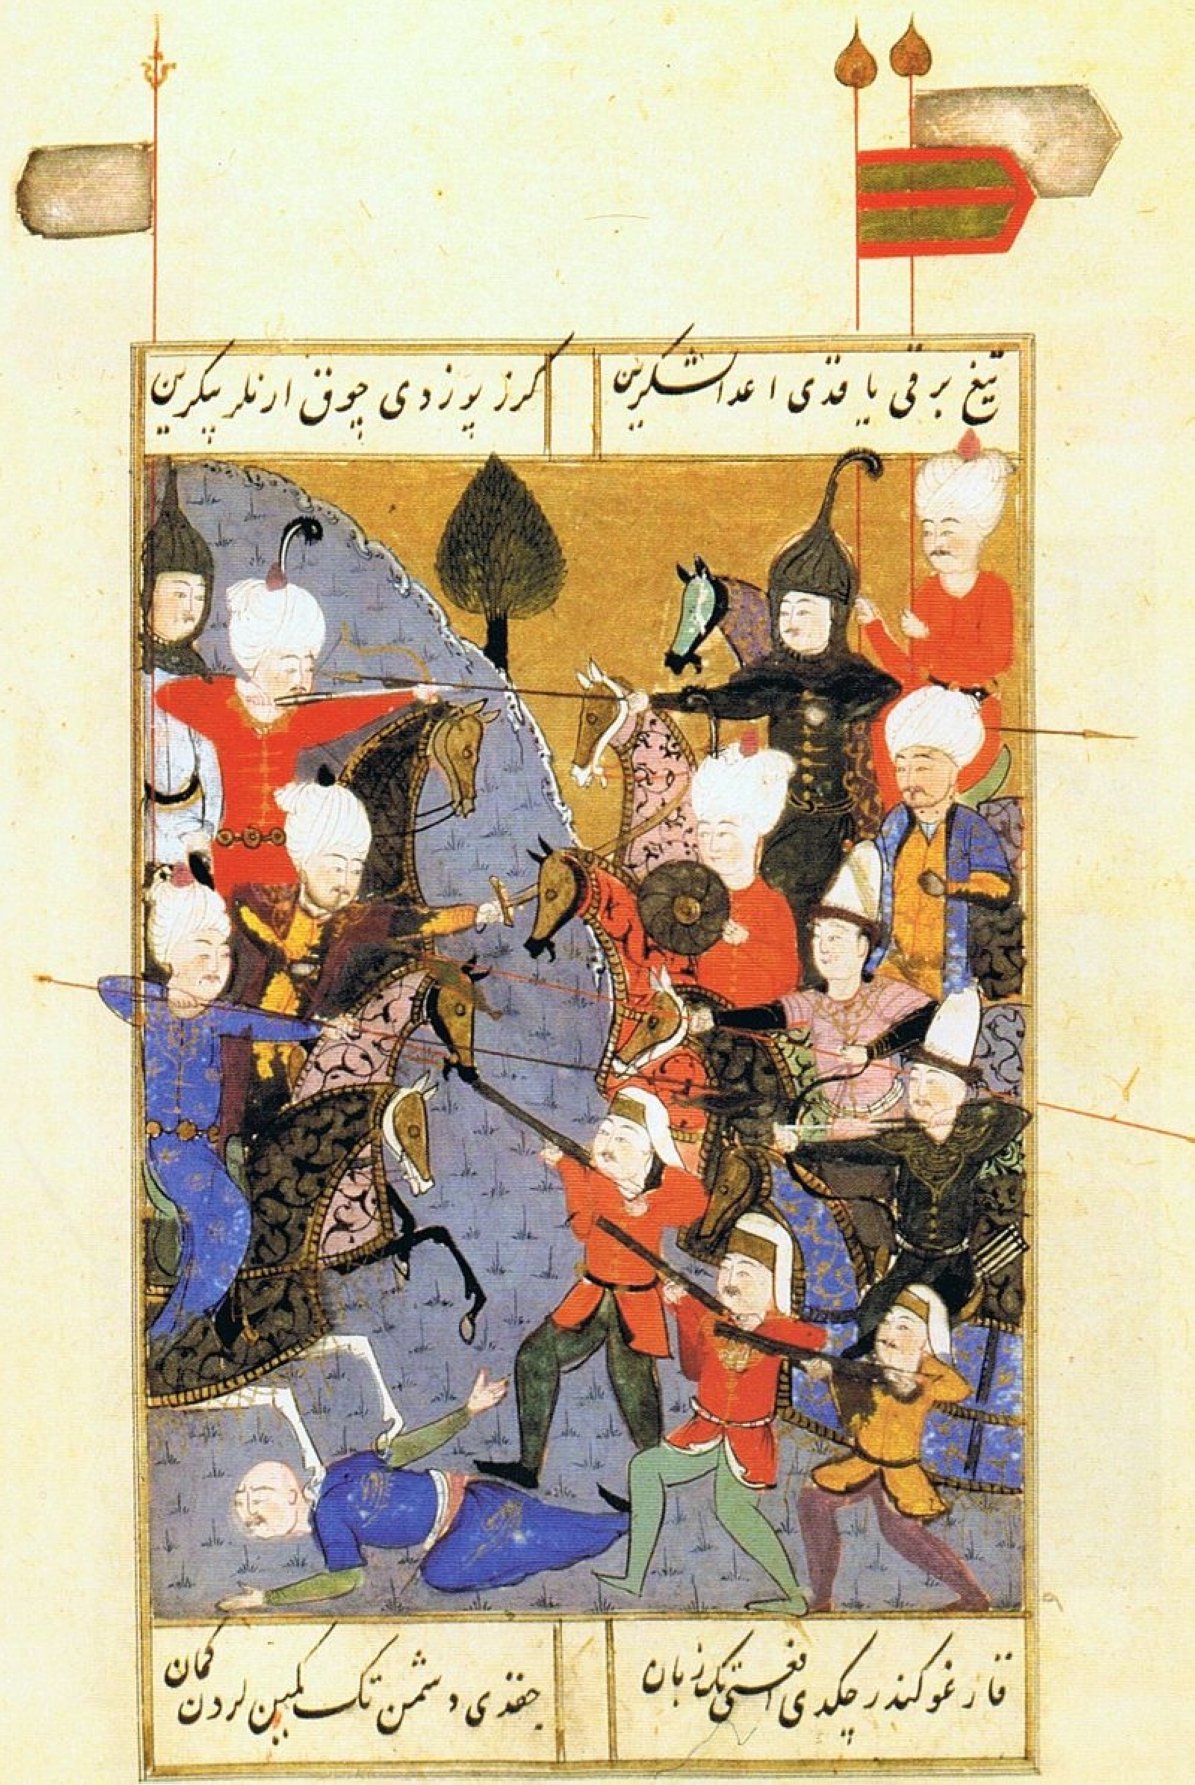 A 16th-century miniature shows the struggle between Sultan Selim and Şehzade Ahmed. (Wikimedia Photo)